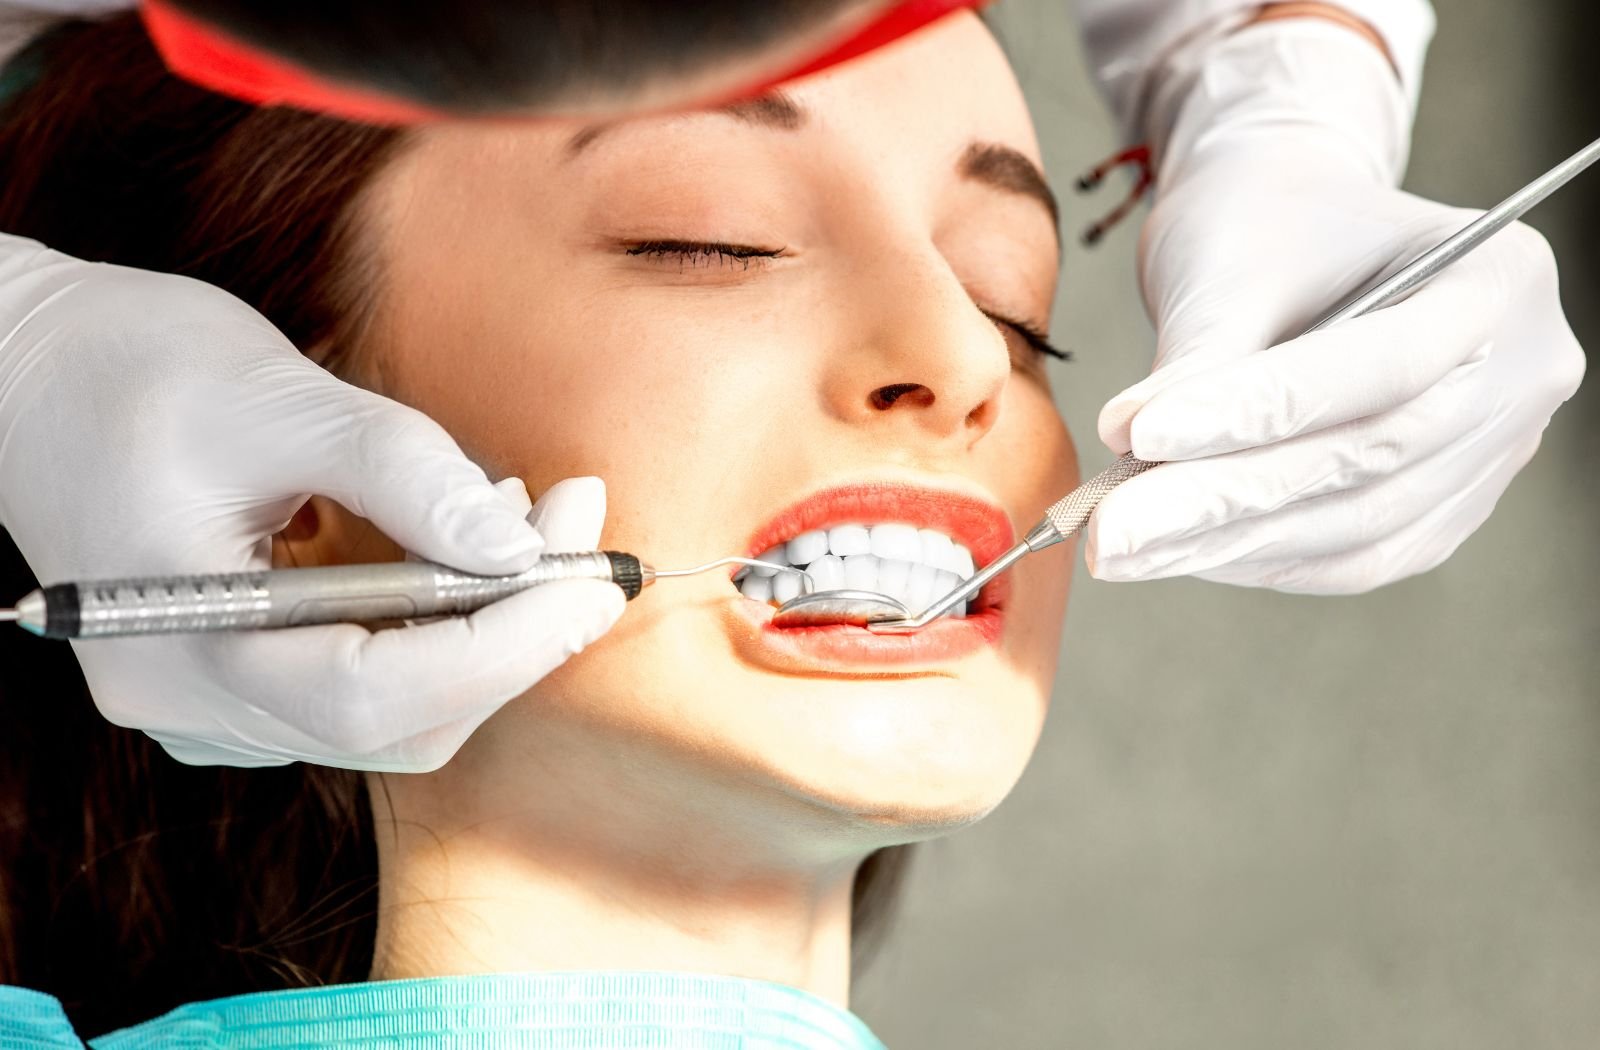 Teeth cleaning in Ancaster